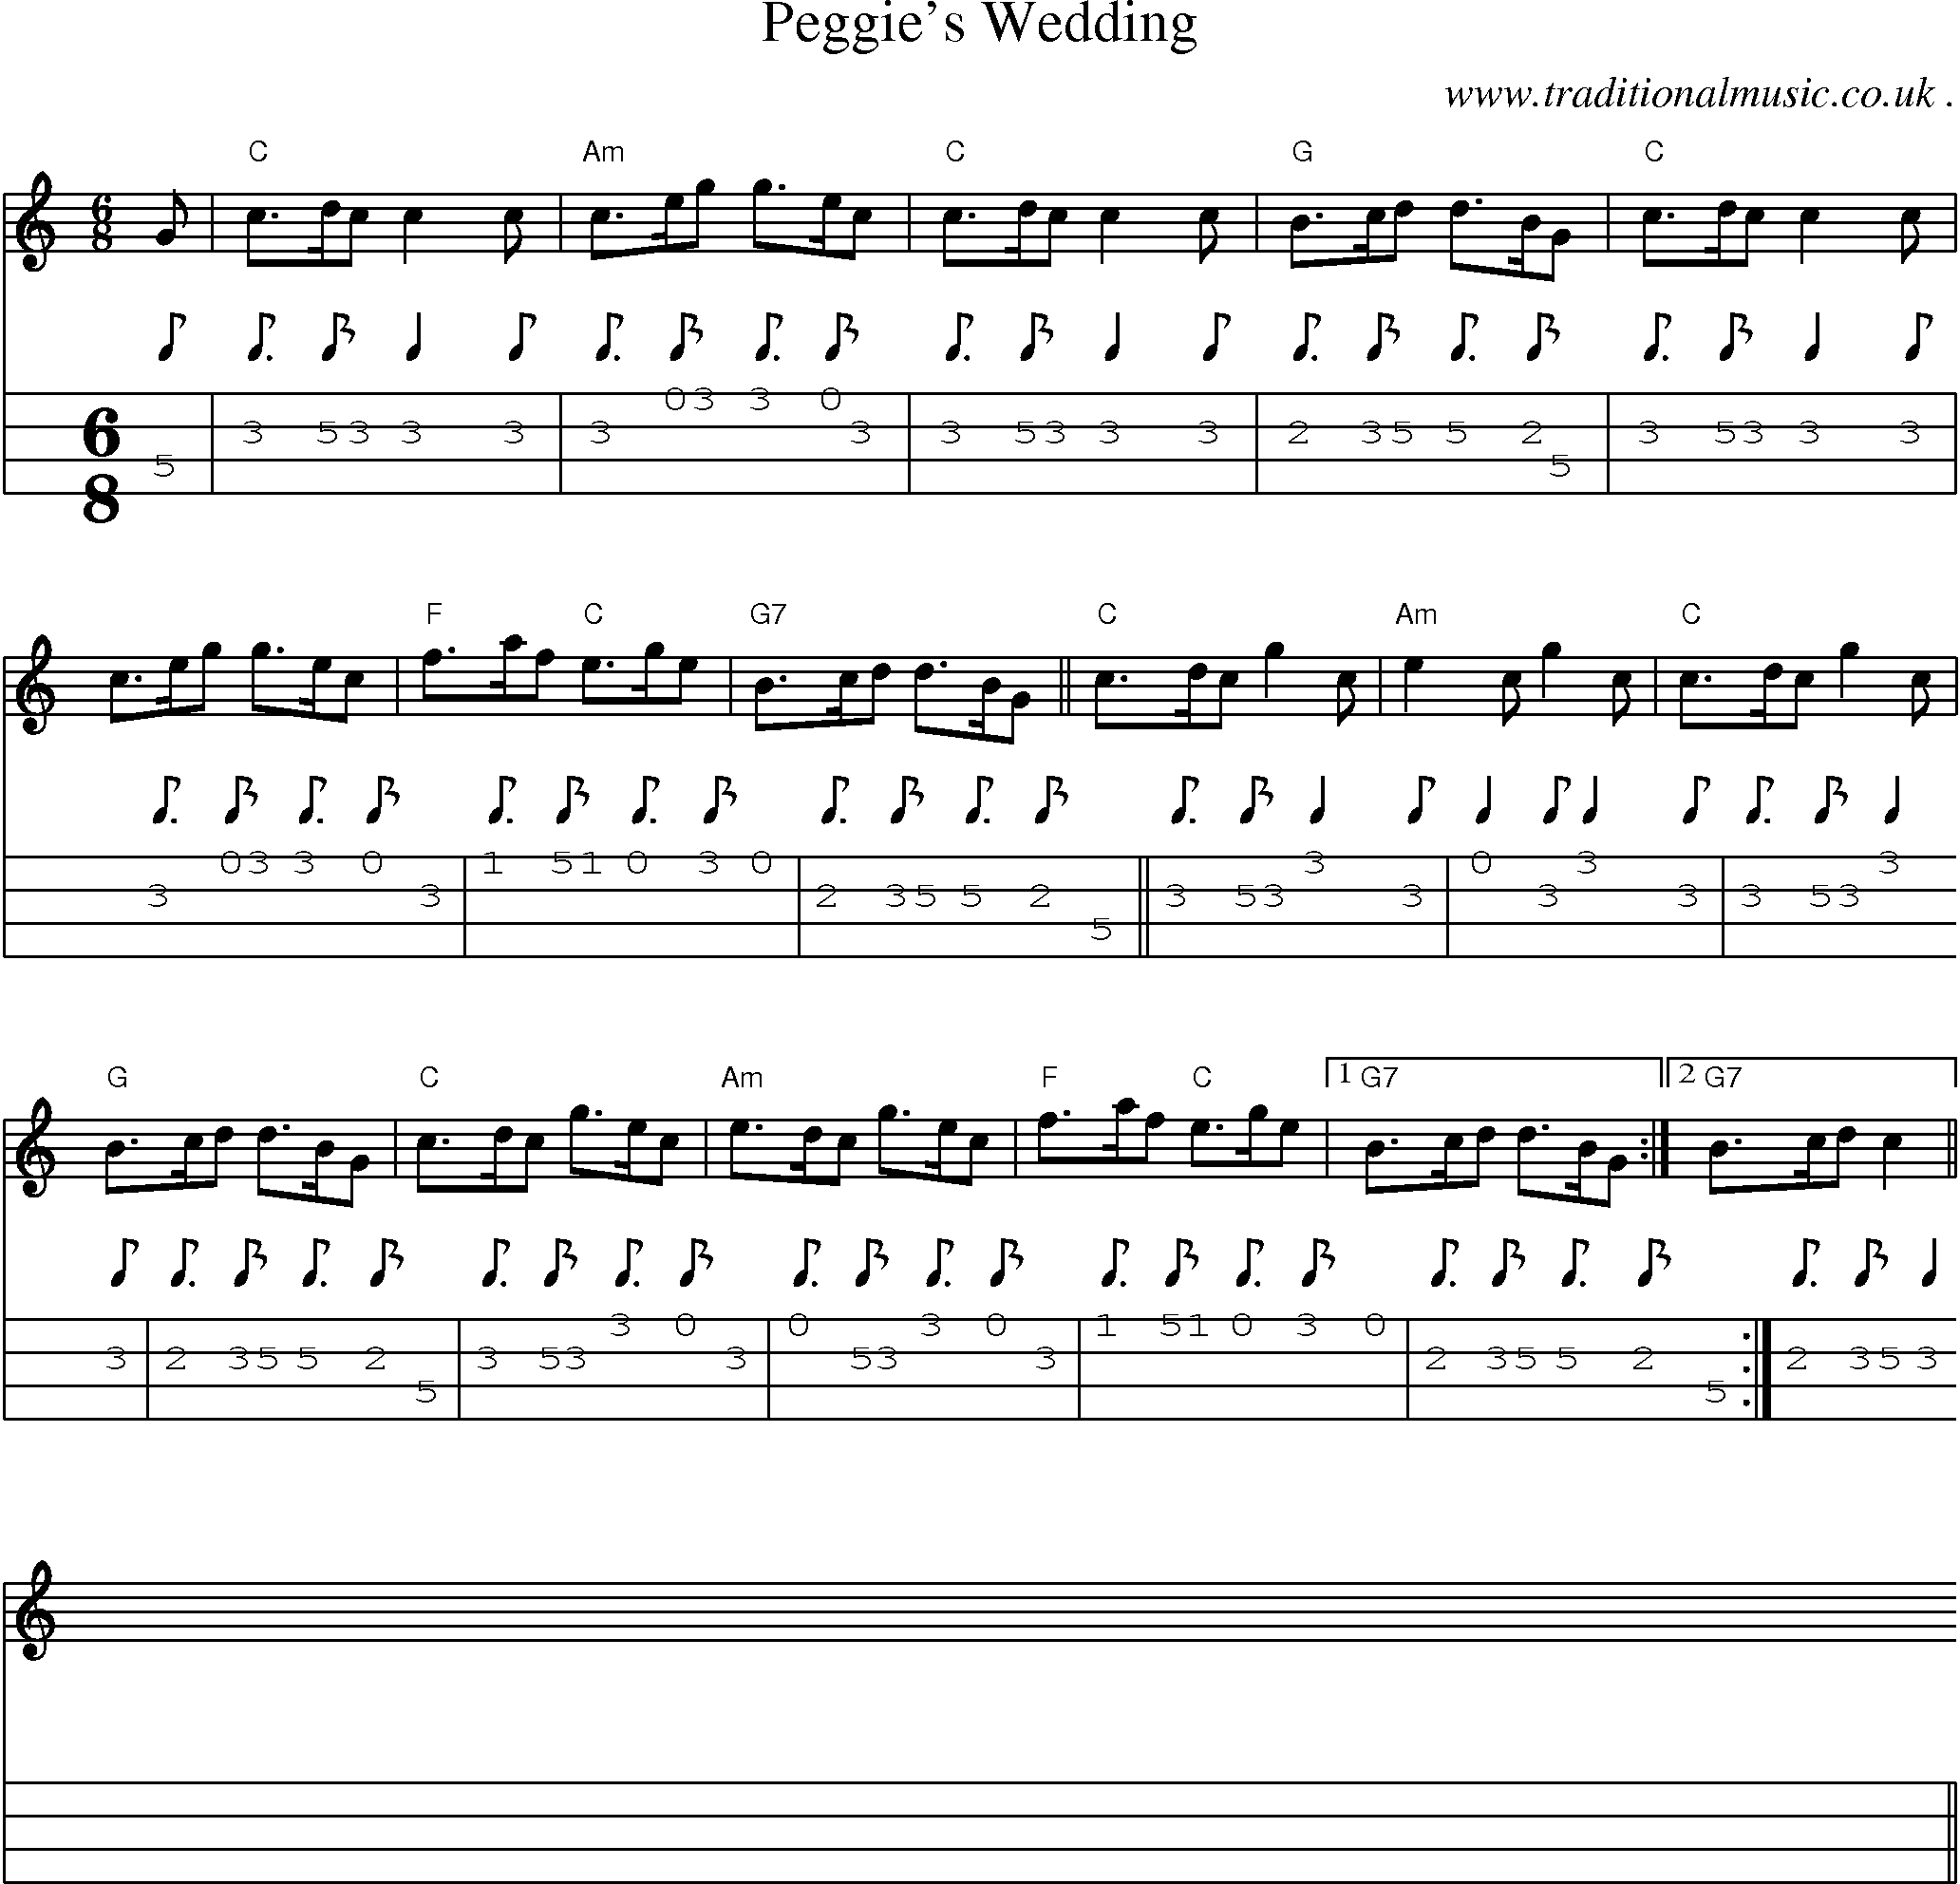 Sheet-music  score, Chords and Mandolin Tabs for Peggies Wedding